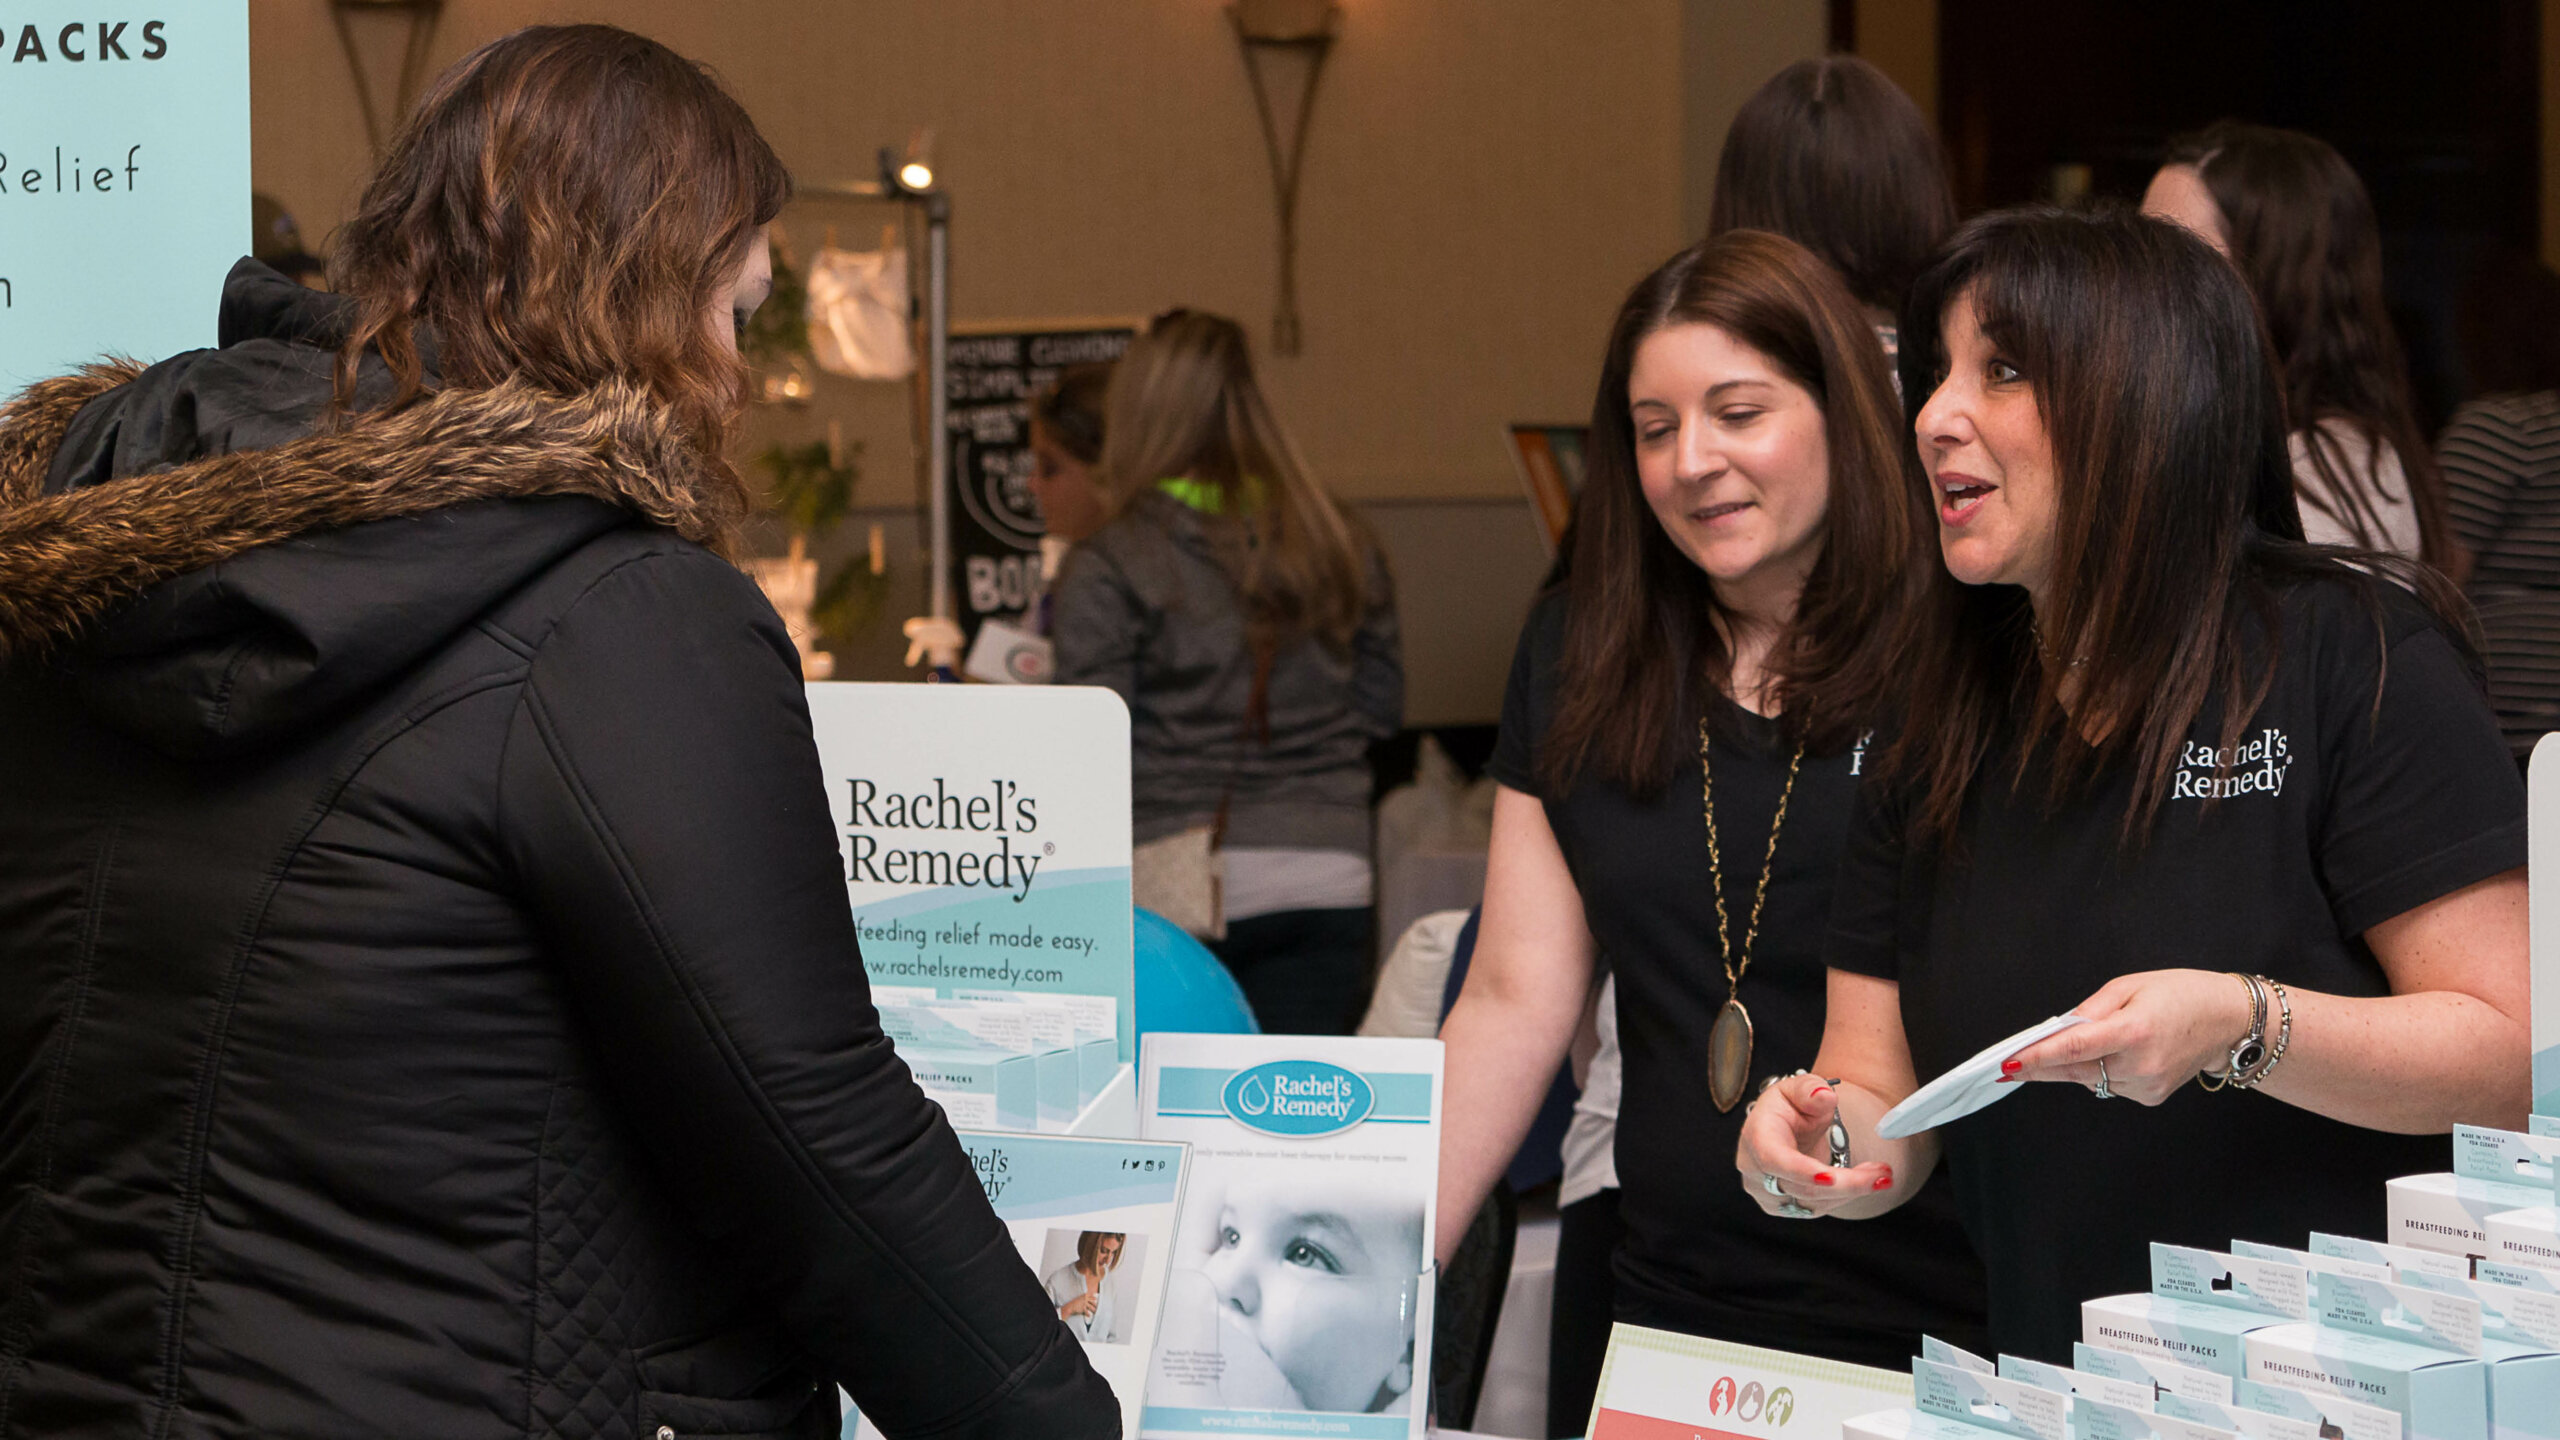 exhibitors and attendee at babies & bumps event